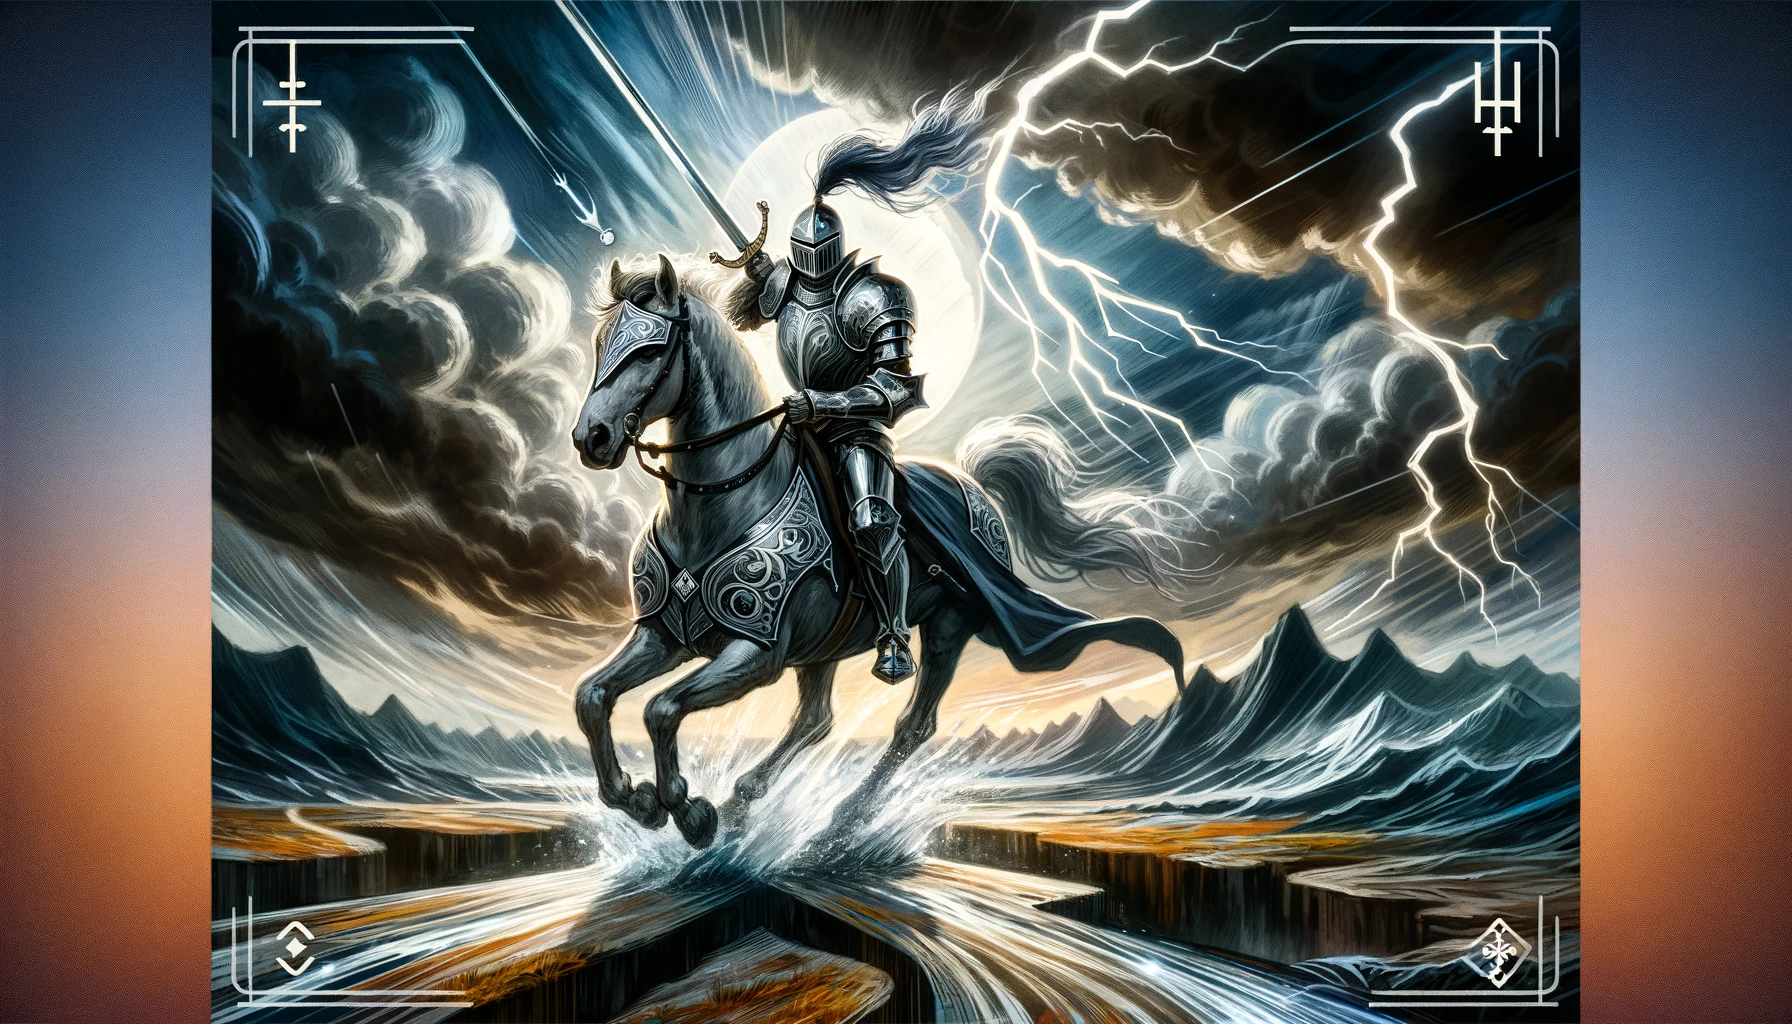 "Illustration of the Knight of Swords tarot card, symbolizing swift action, change, and intellectual challenges. The dynamic scene captures the essence of navigating through tumultuous situations, offering a compelling visual interpretation of the card's significance in the context of life's changing circumstances."